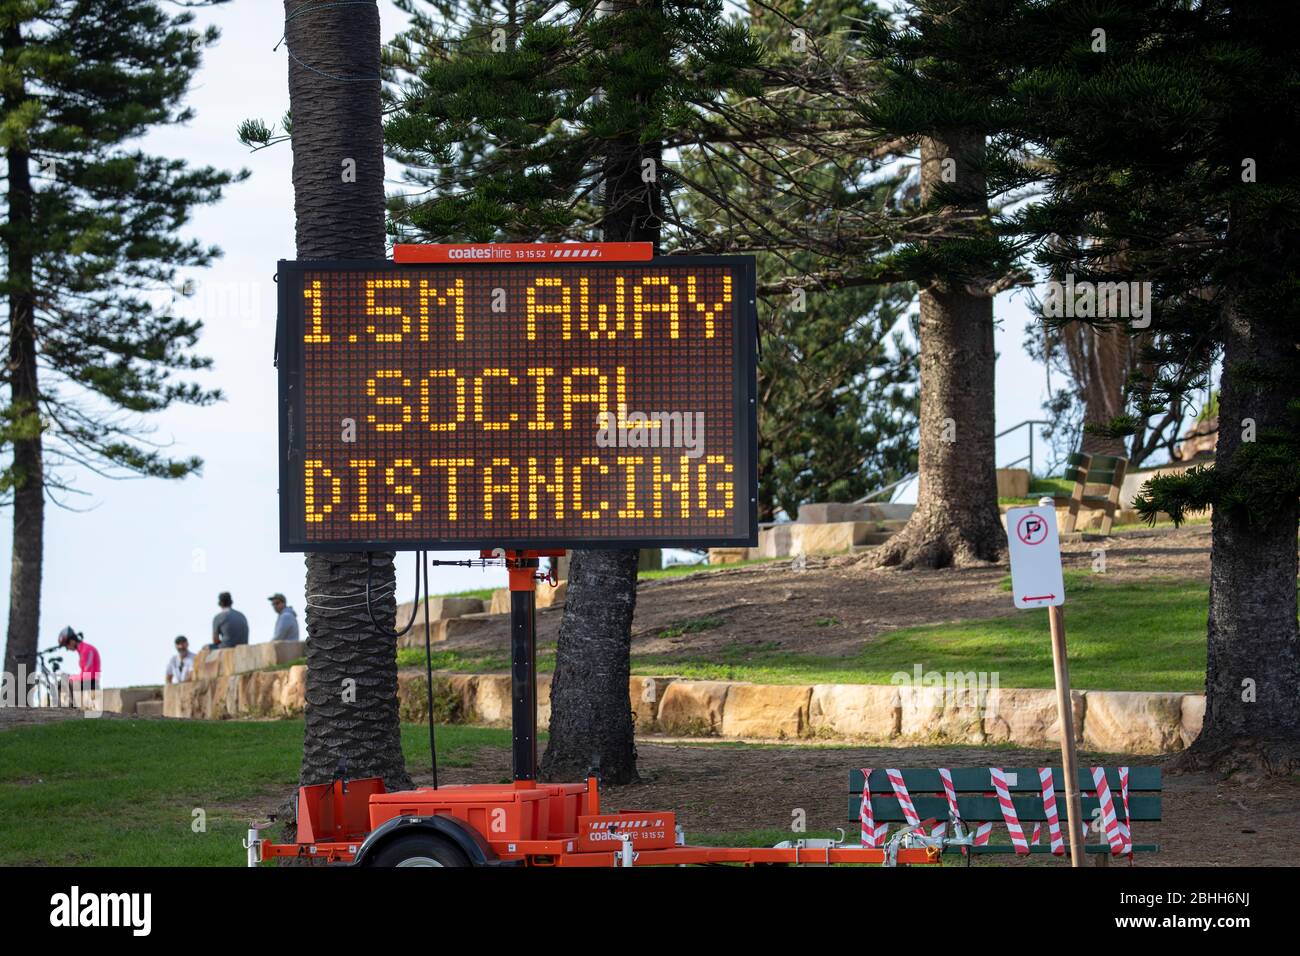 oronavirus Sydney, electronic sign at Avalon Beach in Sydney reminding people to maintain social distancing of 1.5 metres away,Australia Stock Photo